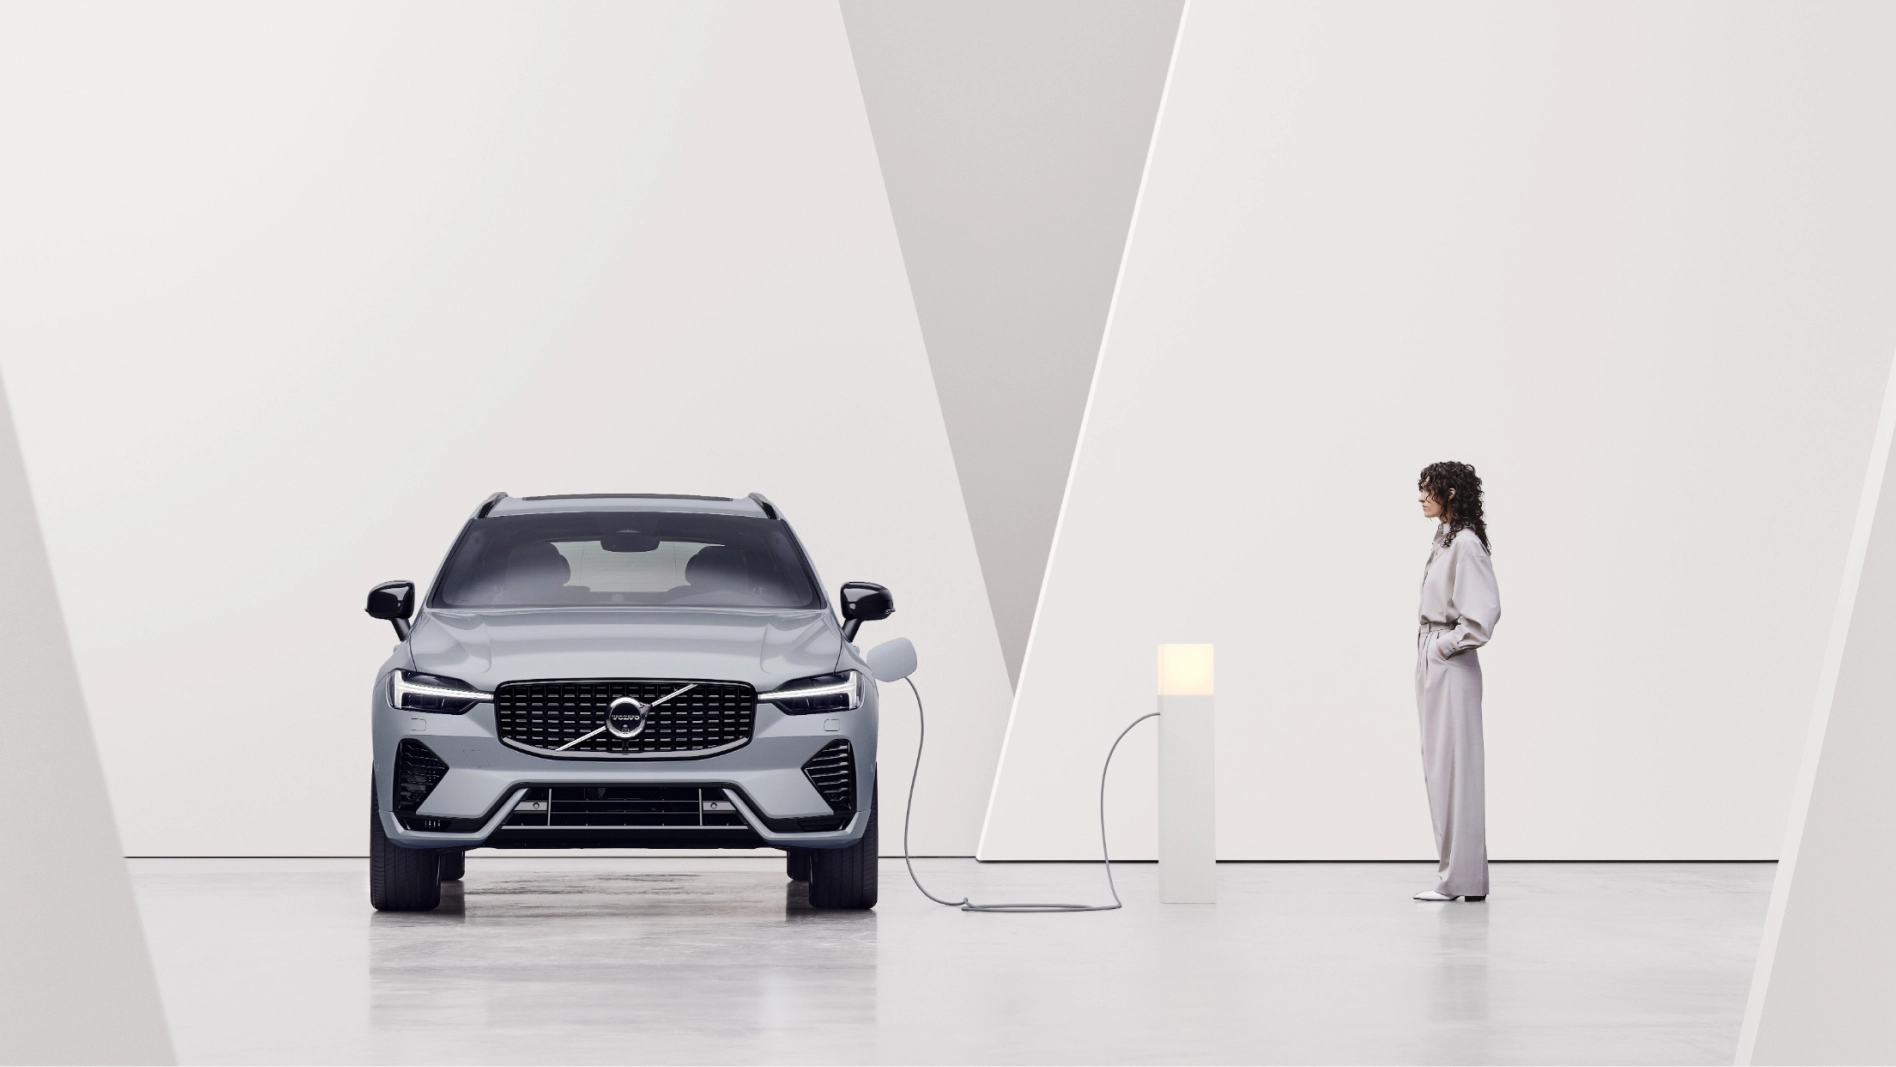 The sleek and stylish exterior of the Volvo XC60 PHEV